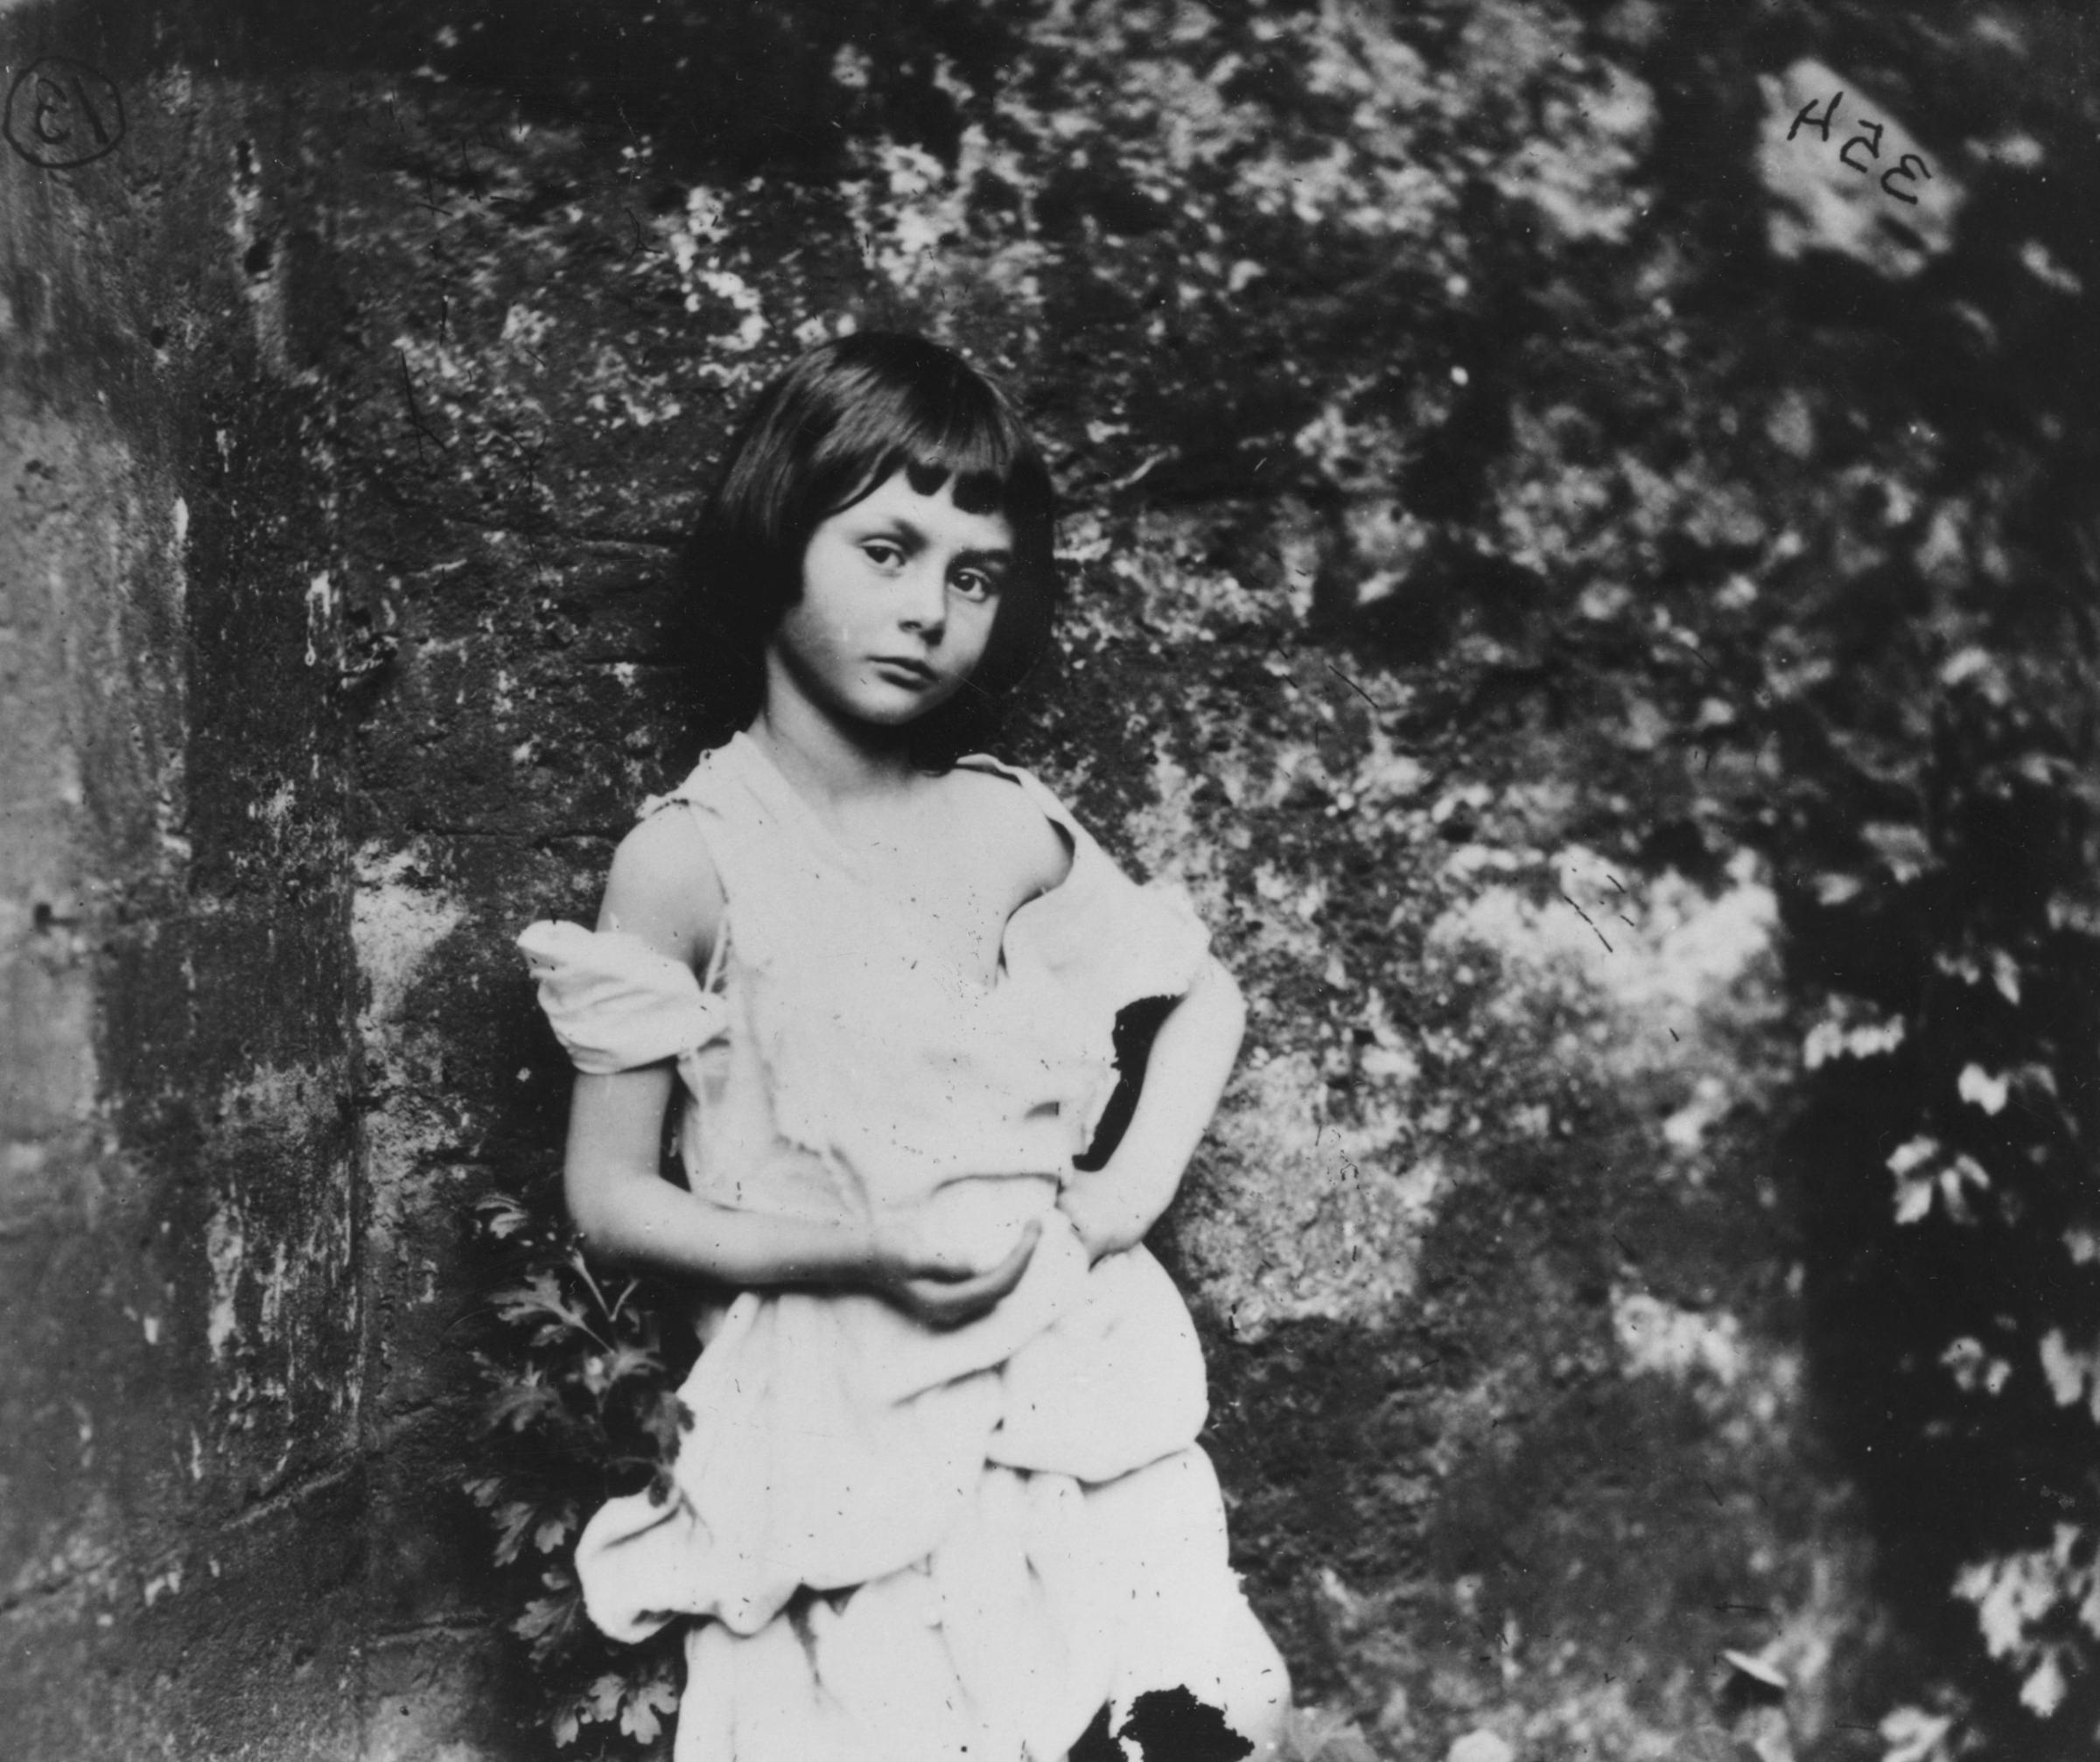 Alice Liddell (1852 - 1934), the inspiration for Lewis Carroll's fictional character Alice in 'Alice in Wonderland'. She is posing as 'The Beggar-Maid.' 1858.